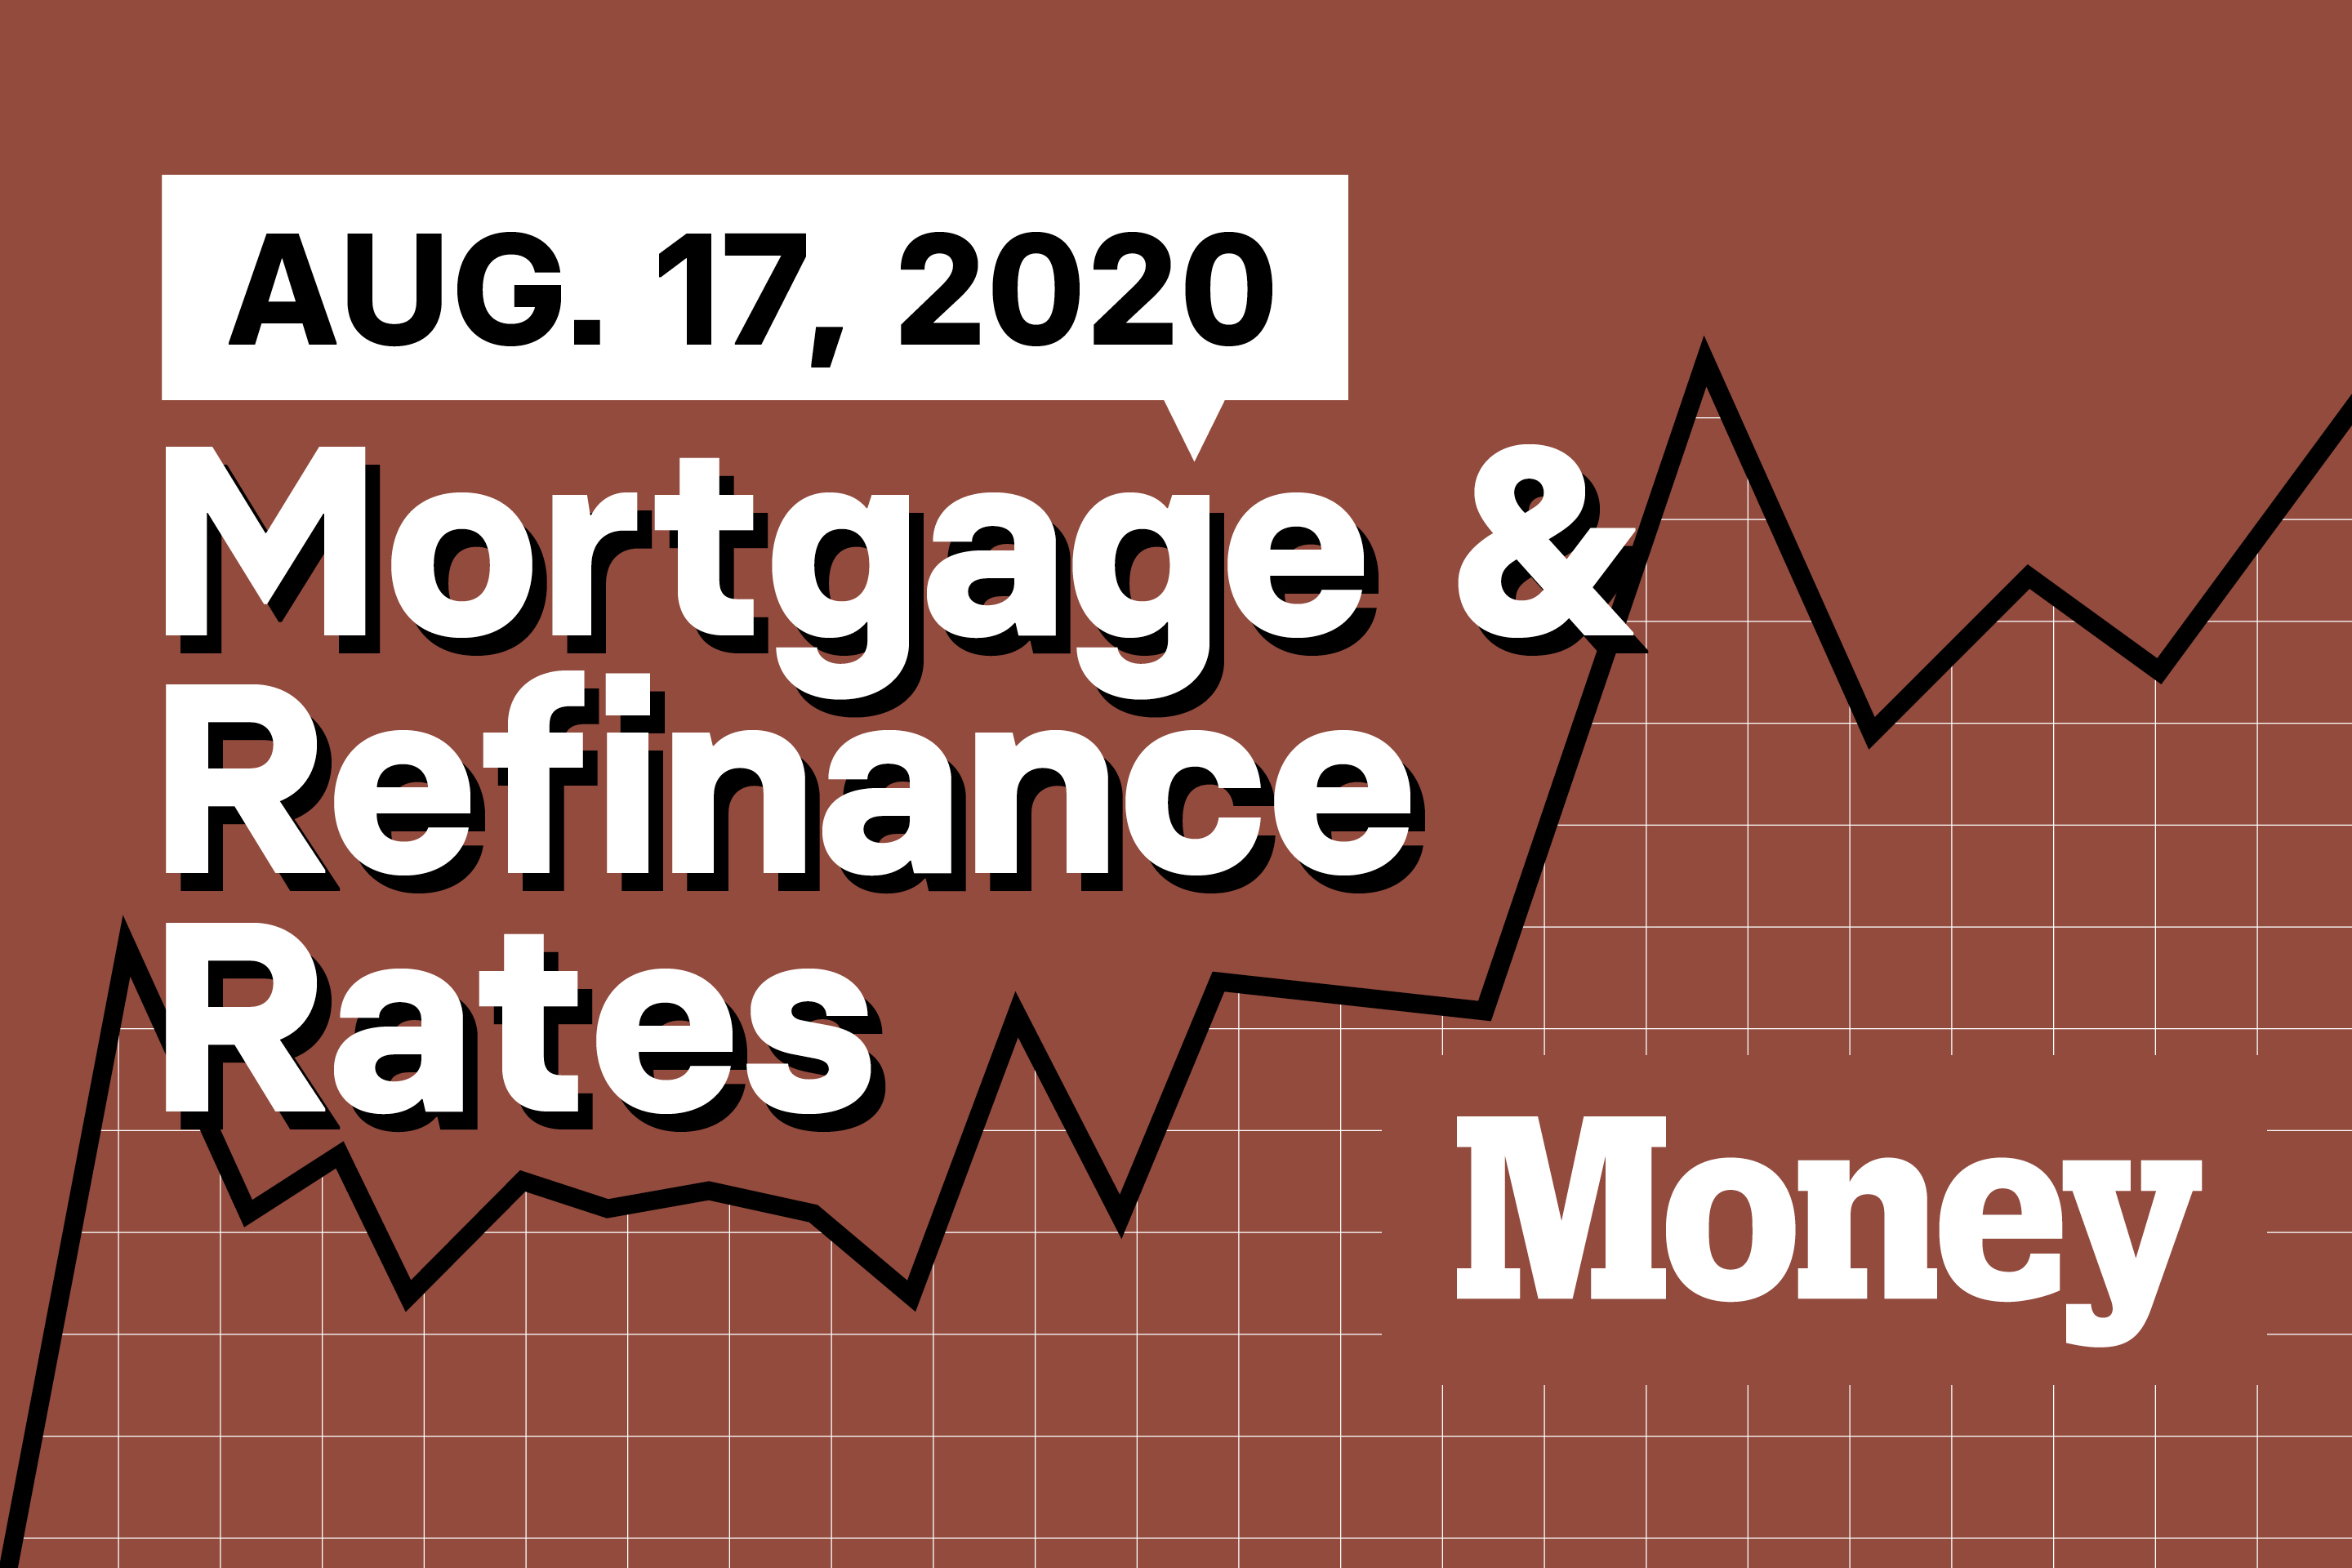 Here Are Today's Best Mortgage & Refinance Rates for August 17, 2020